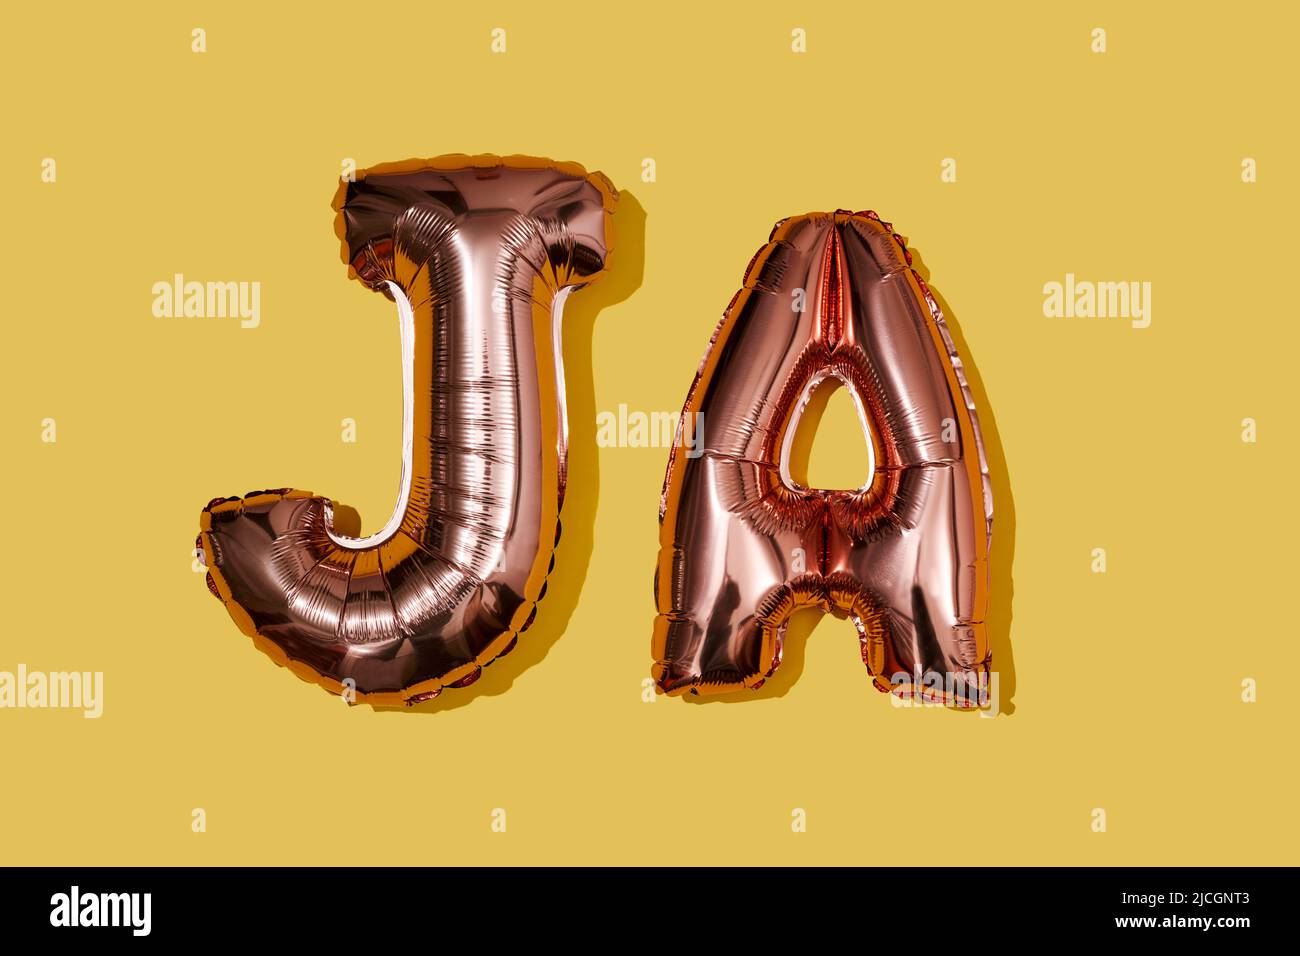 some metallic pink letter-shaped balloons forming the word ja, for yes in some germanic languages, such as german, dutch or danish, on a yellow backgr Stock Photo